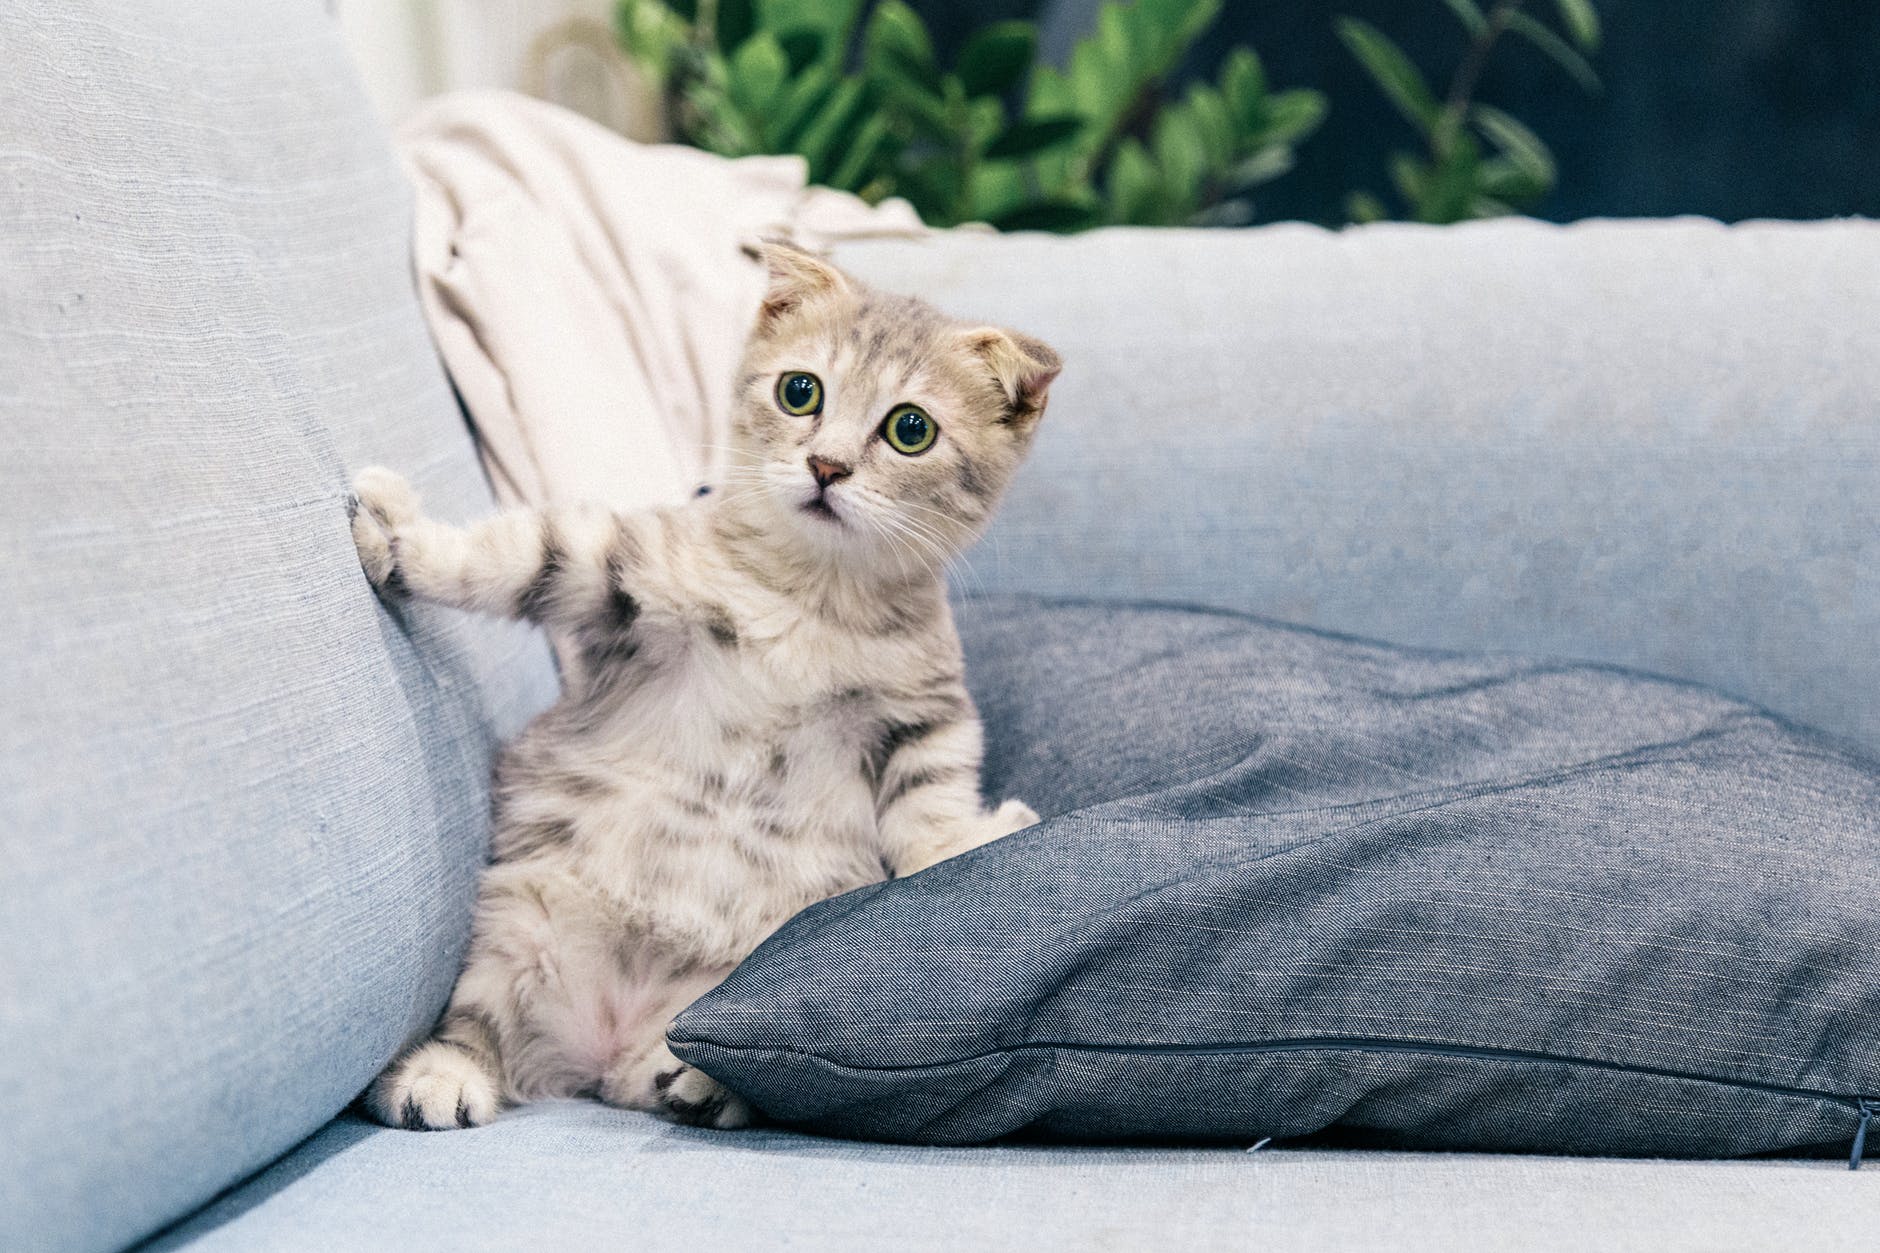 photo of gray and white tabby kitten sitting on sofa